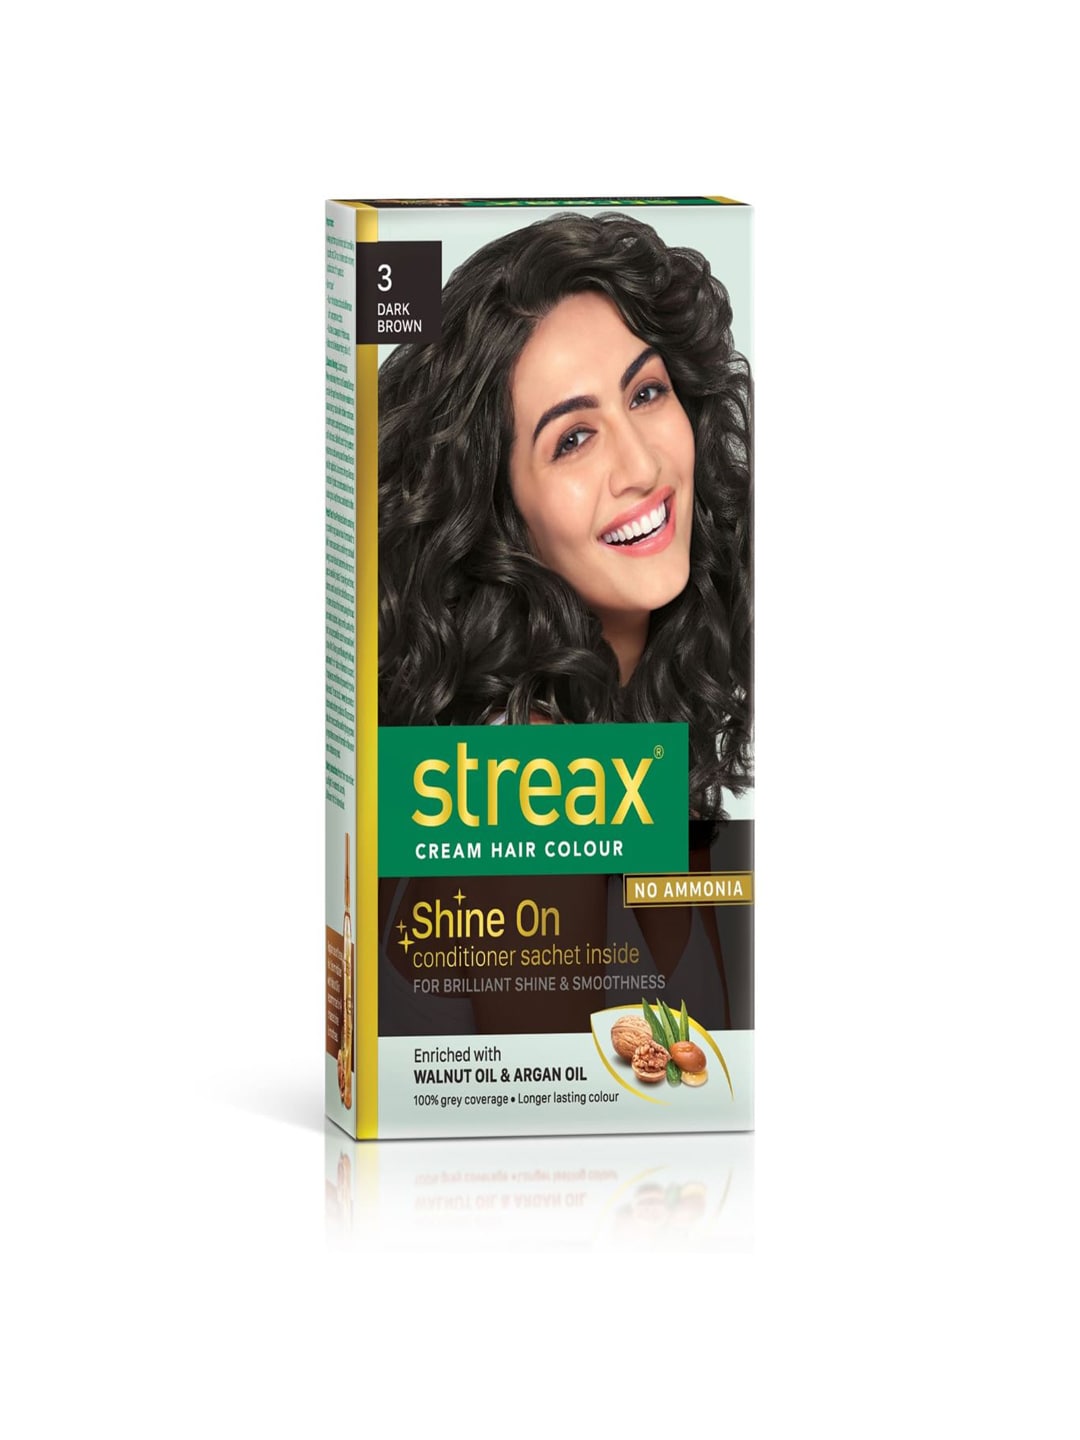 Streax Hair Colour - Dark Brown 120 ml Price in India, Full Specifications  & Offers 